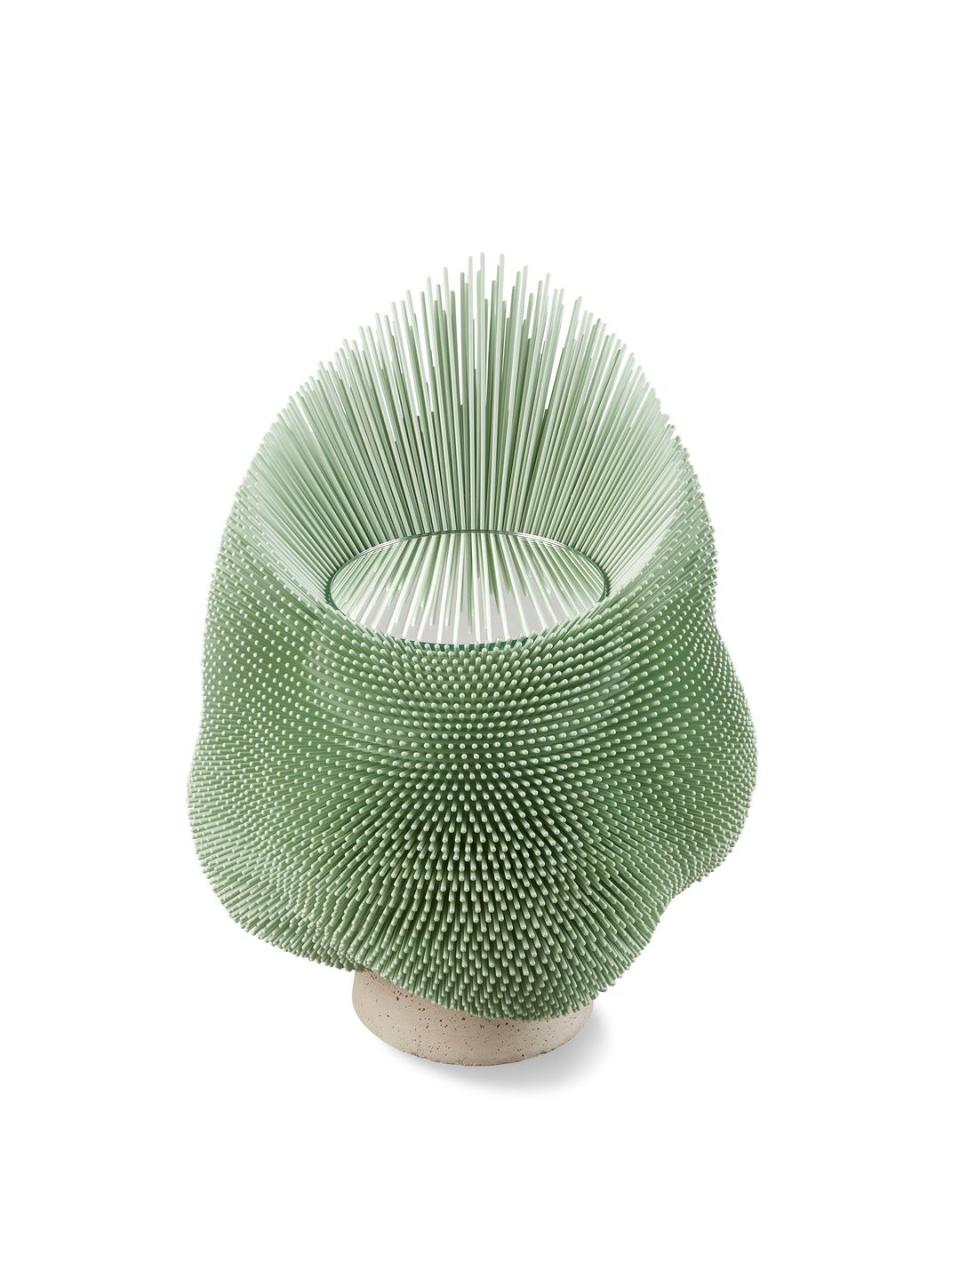 green spikey chair that looks like a sea anemone